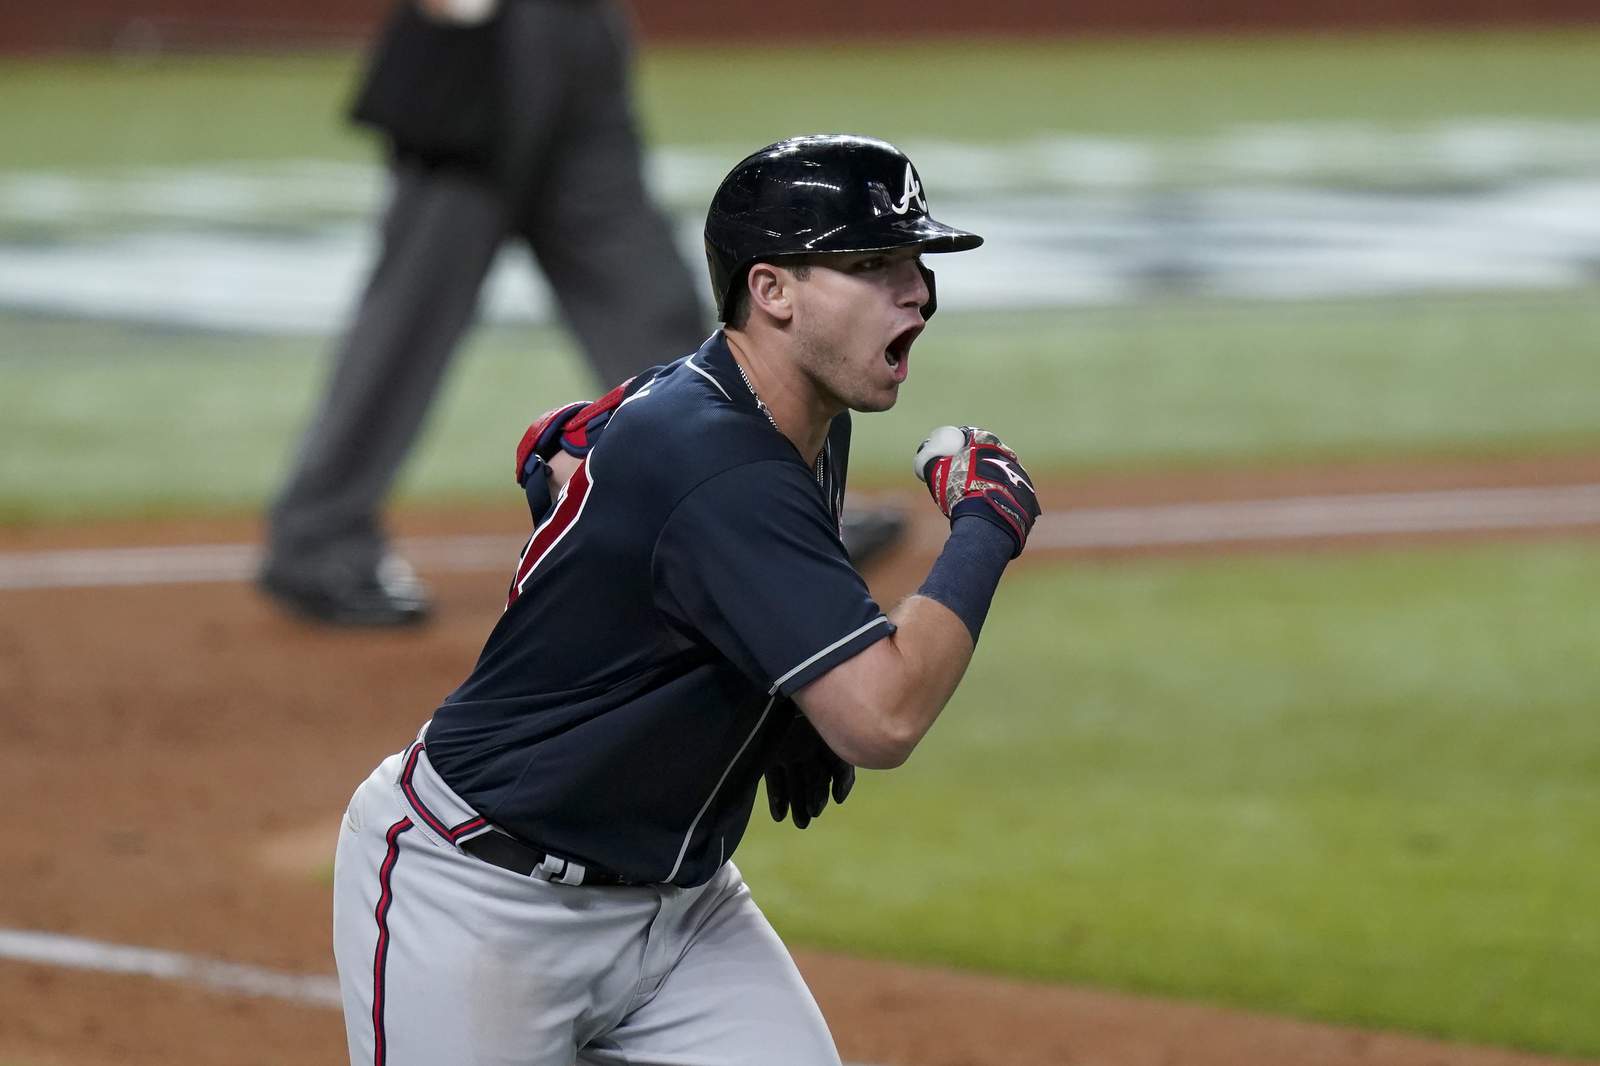 Riley HR in 9th leads Braves past Dodgers 5-1 in NLCS opener